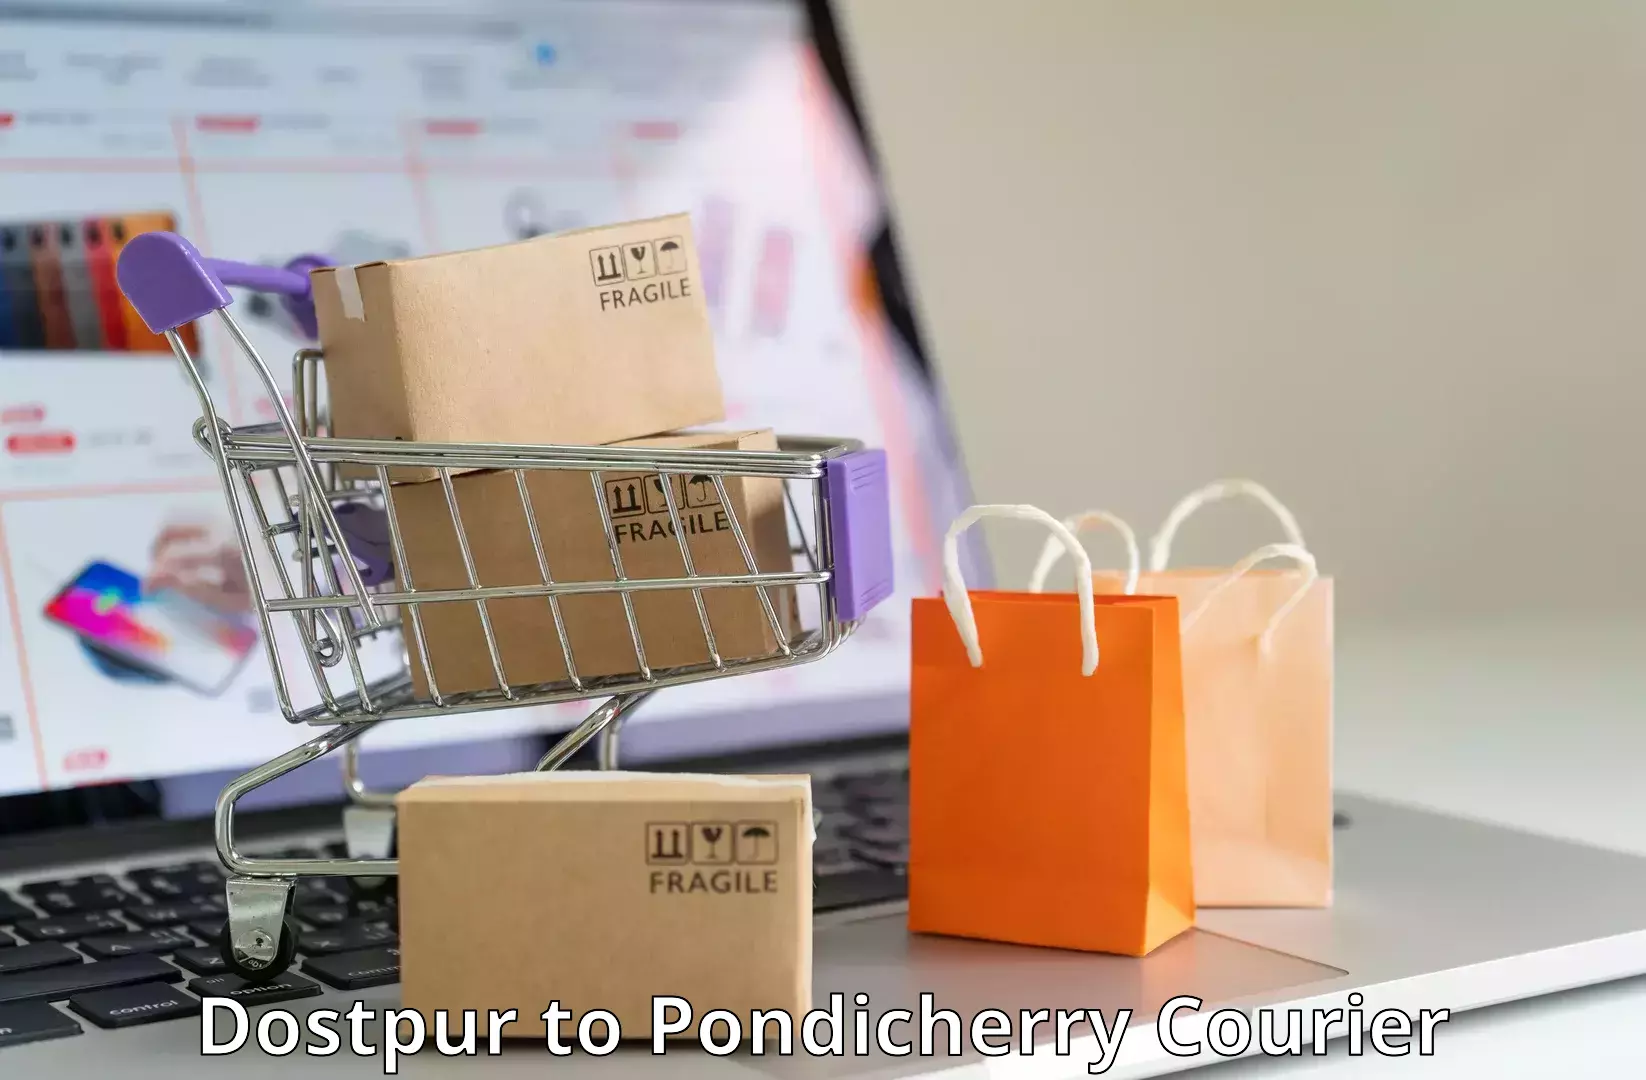 Residential courier service Dostpur to Pondicherry University